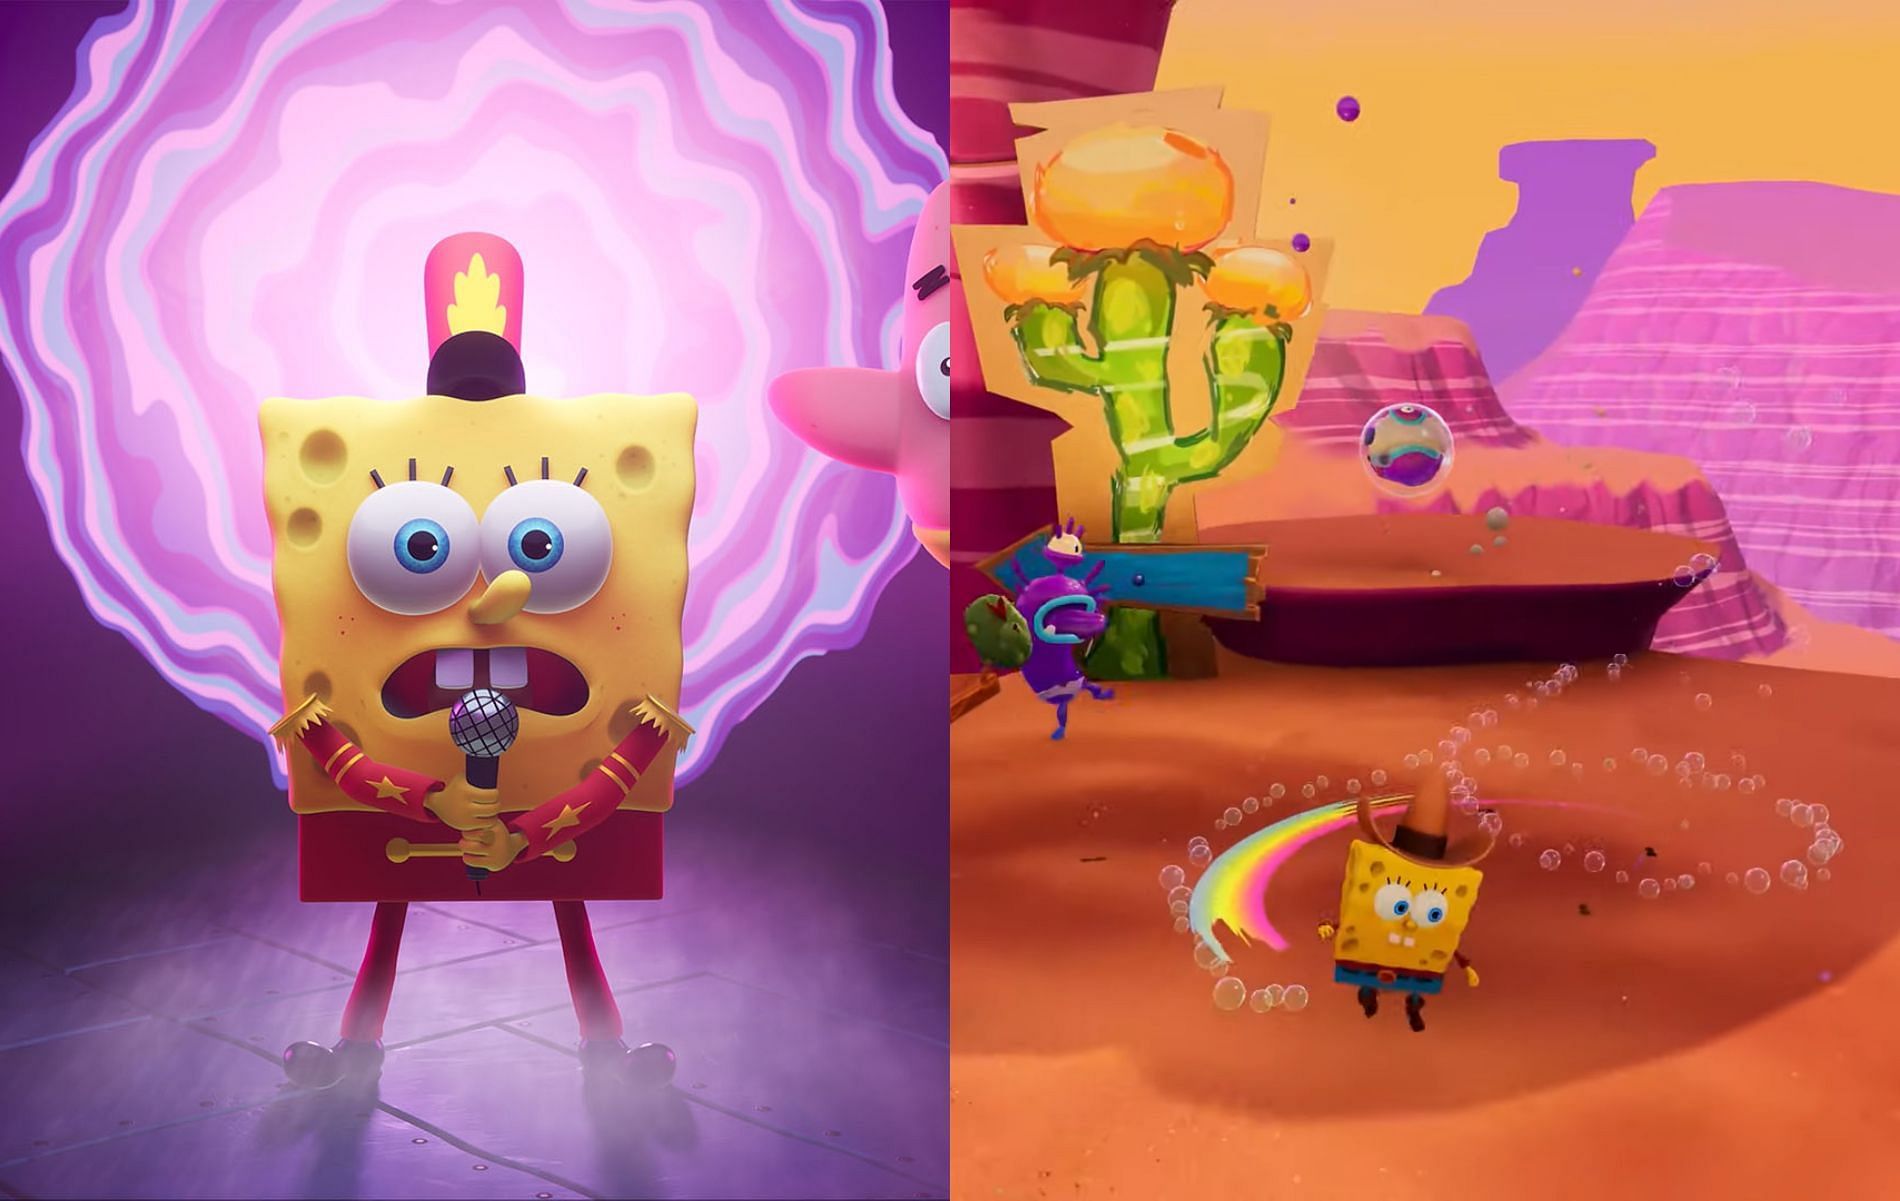 Are you ready for a brand new adventure featuring the beloved yellow sponge? (Images via Thq nORDIC)